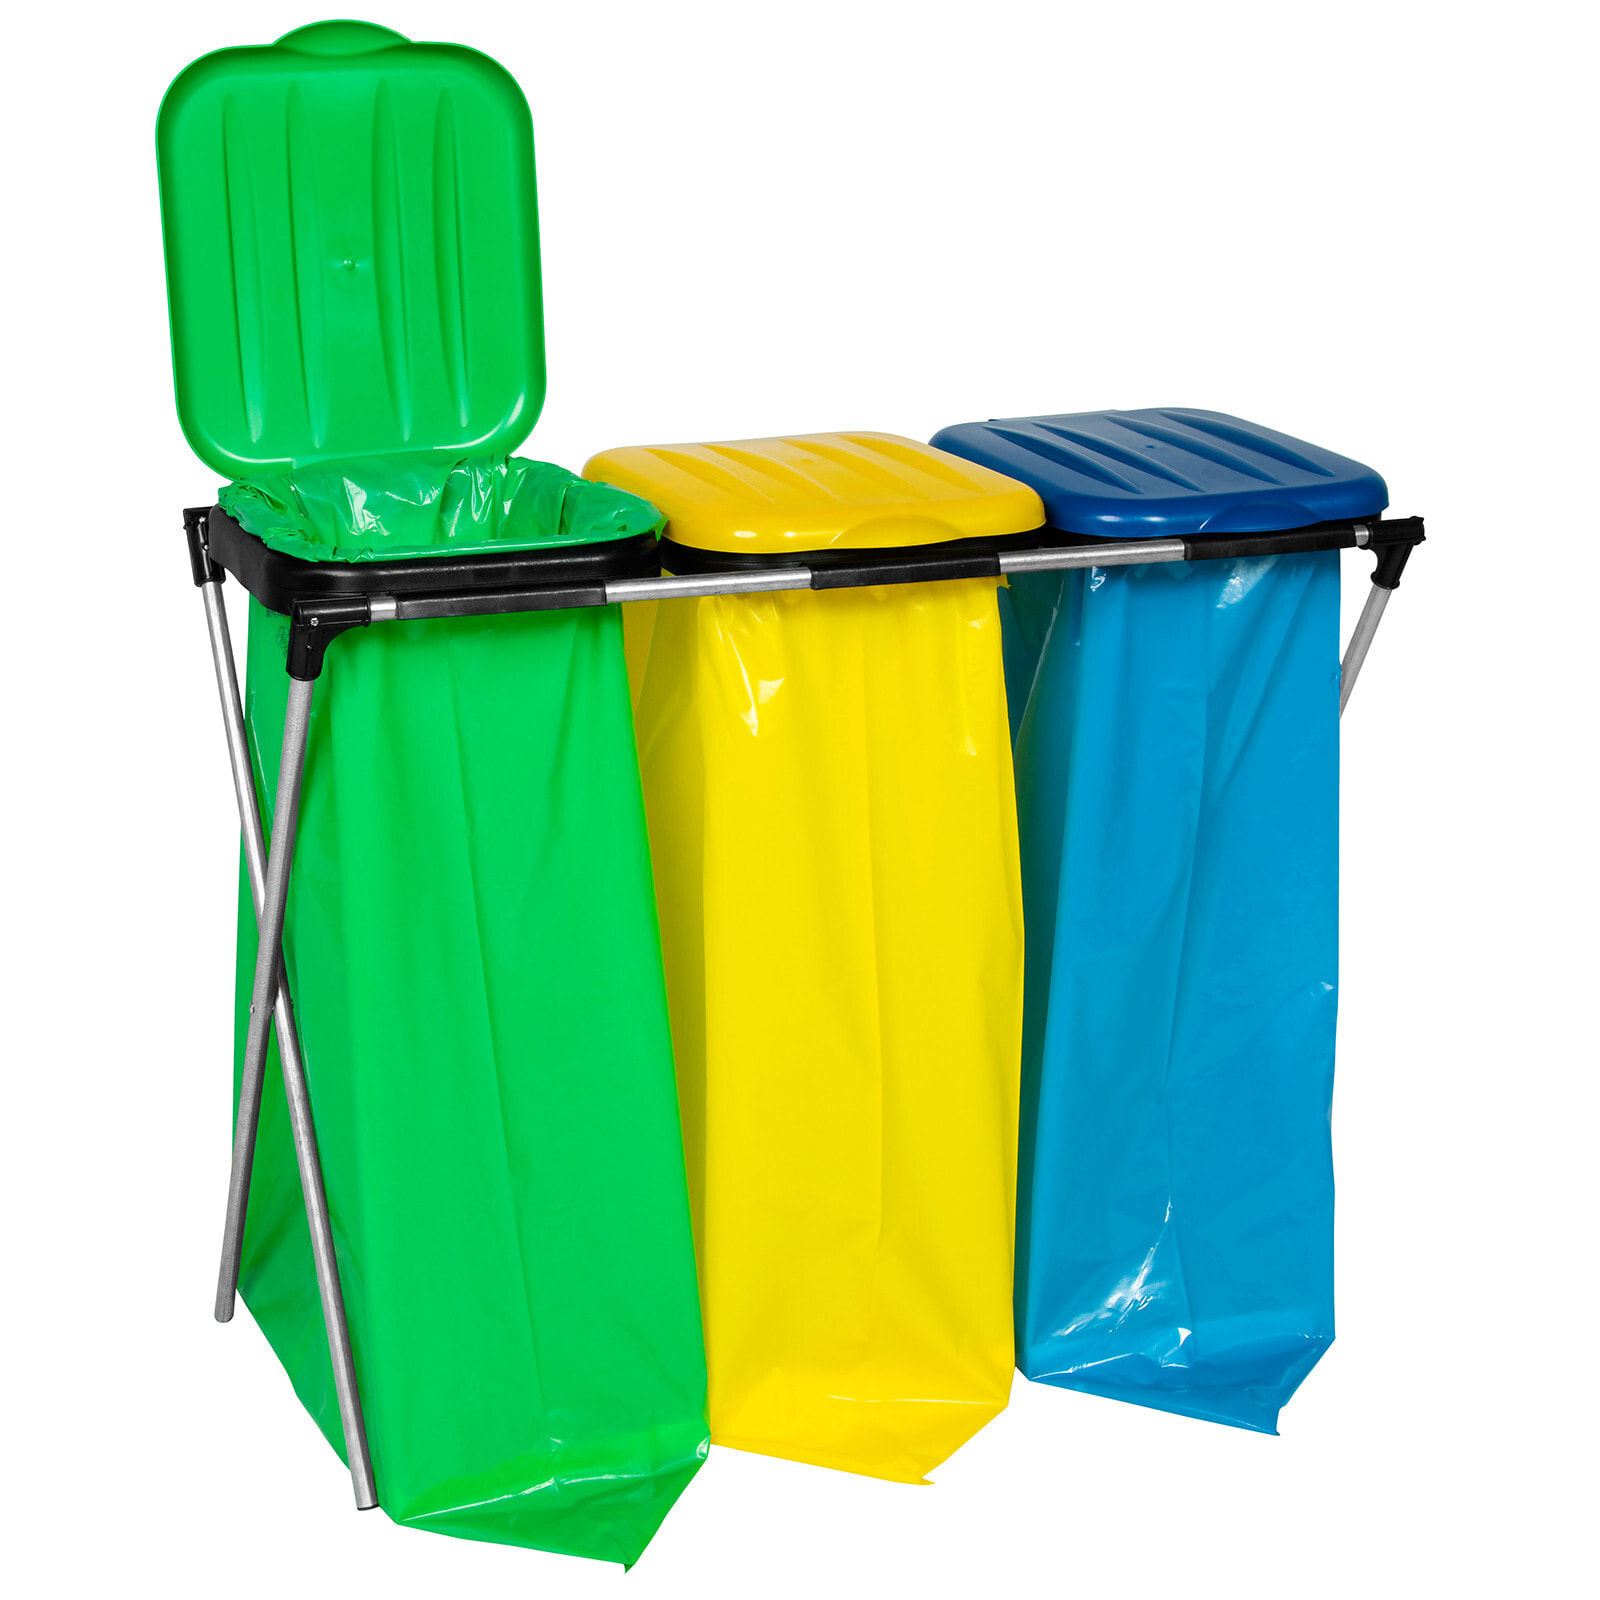 Stand for 120L garbage bags for segregation - 3 types of waste